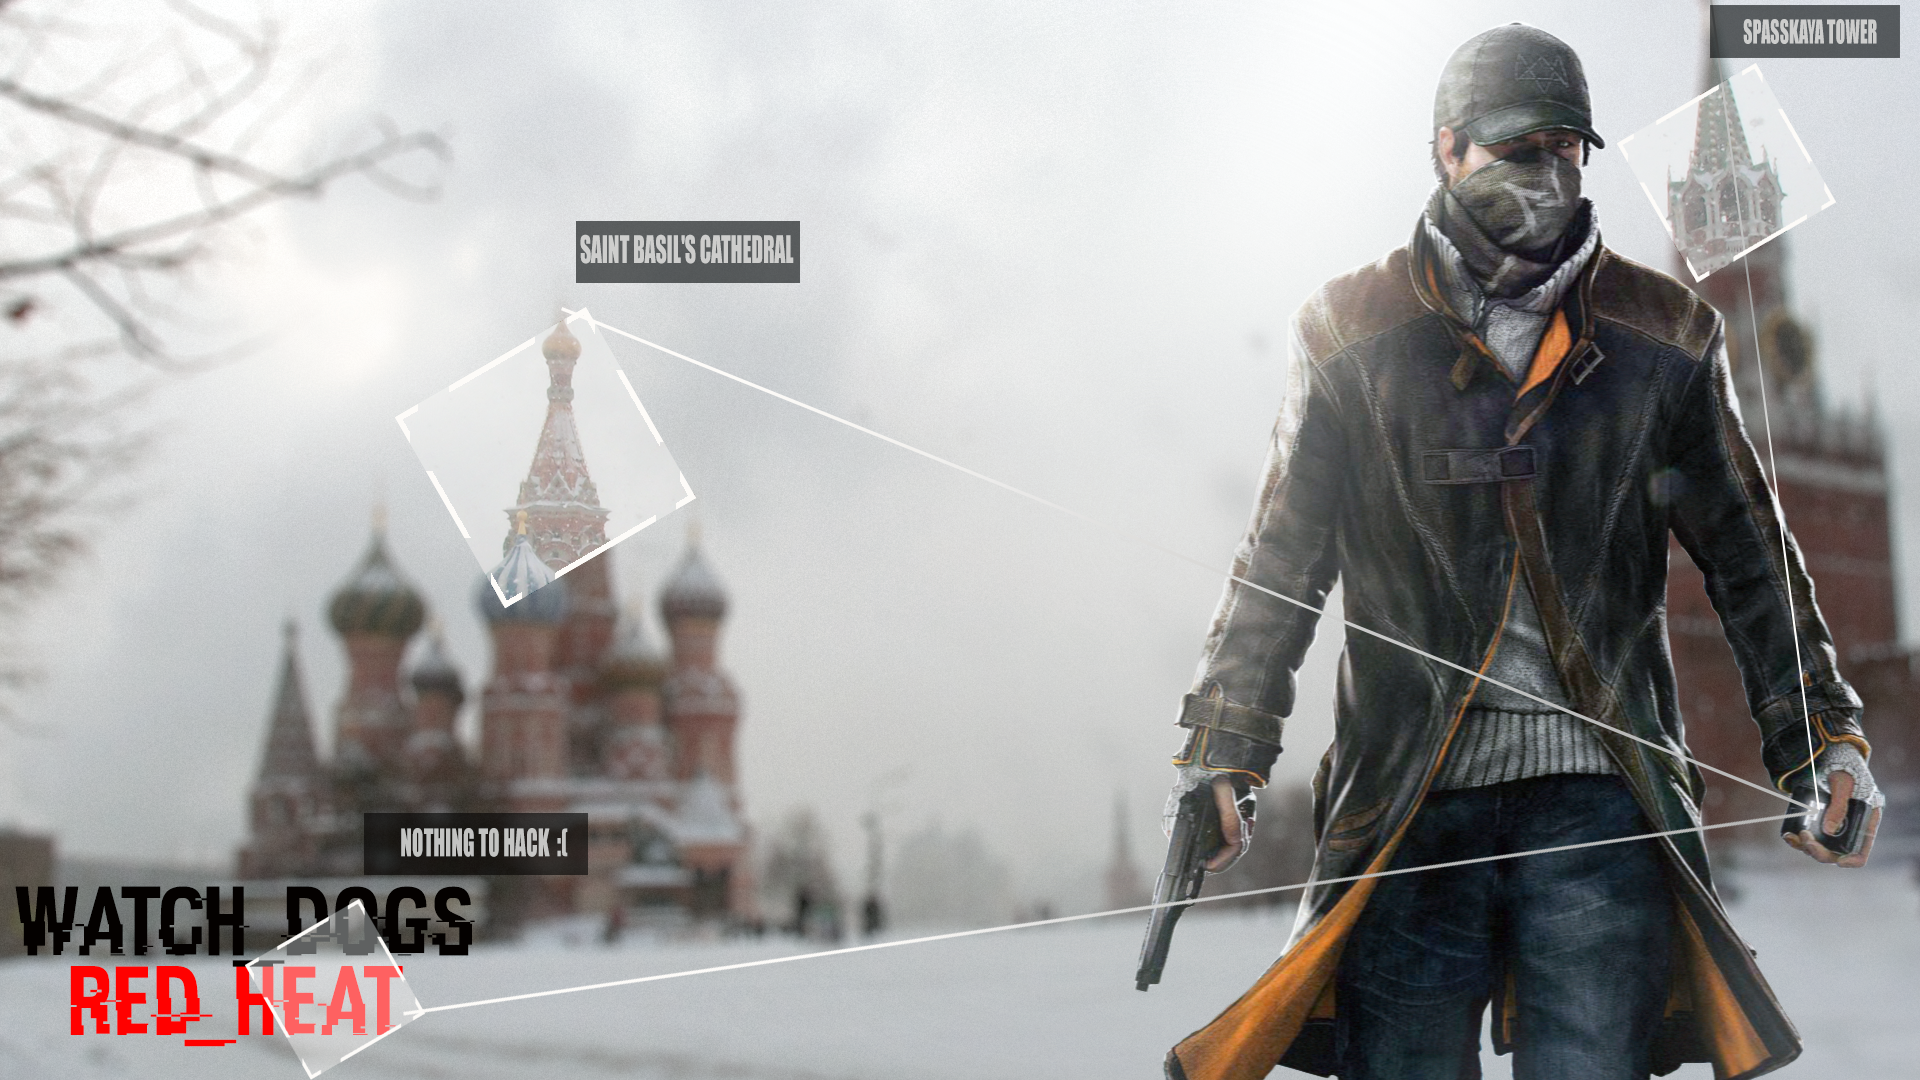 watch_dogs___red_heat_wallpaper_by_barabanrus-d7iuc92.png